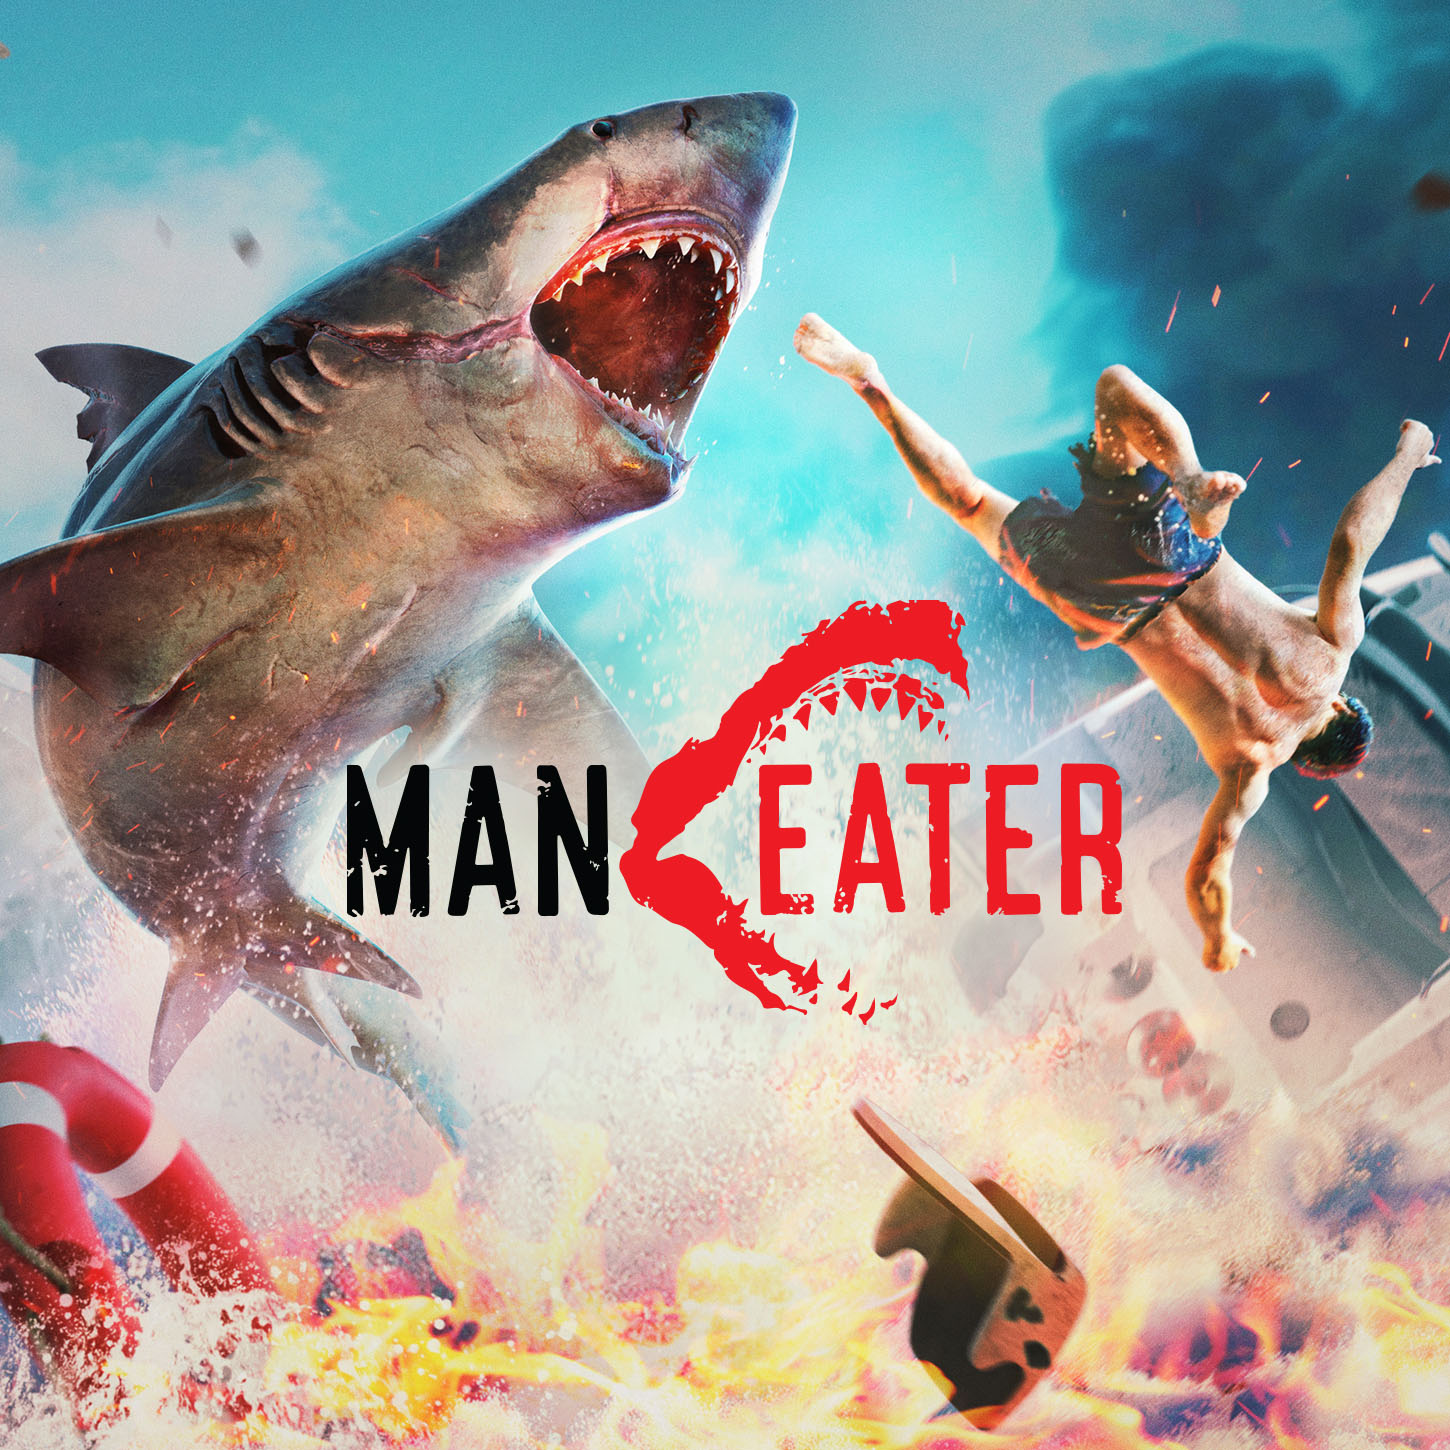 maneater game switch release date